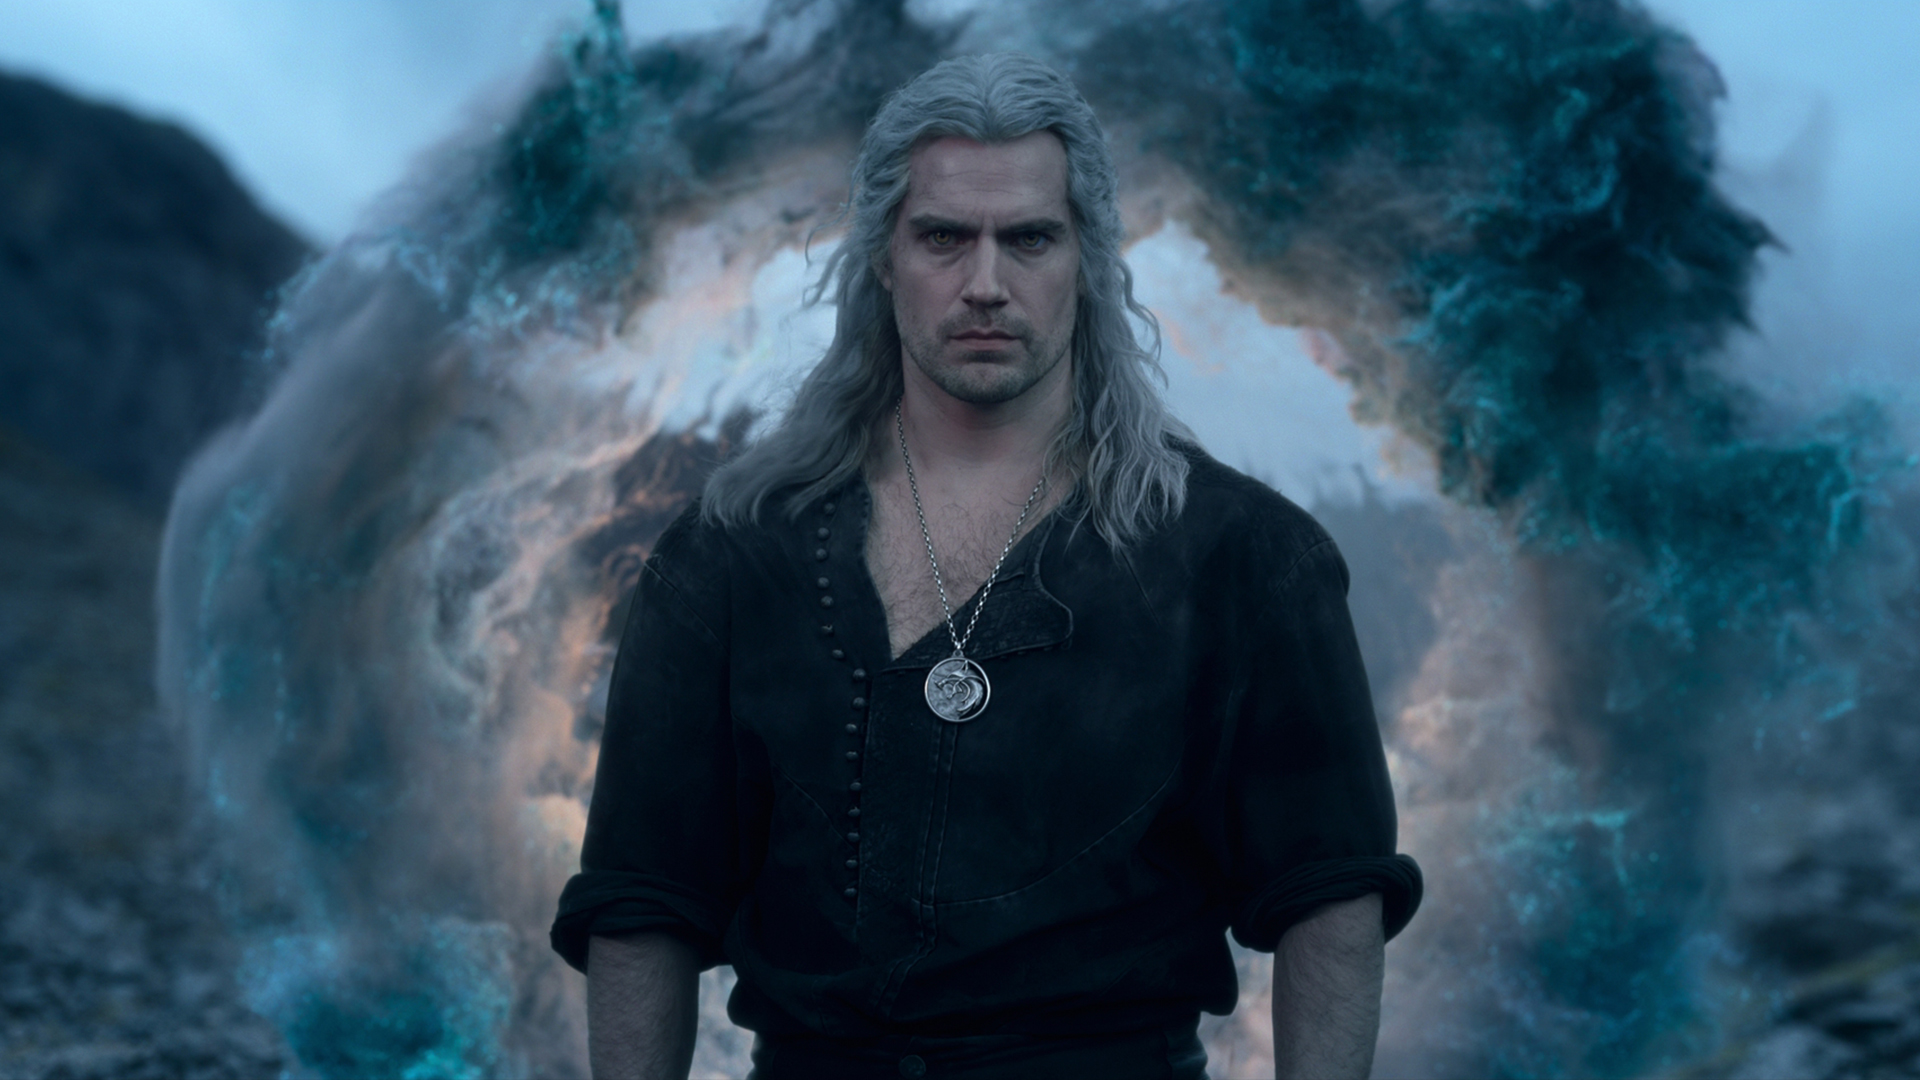 The Witcher season 3 ending explained: Henry Cavill's departure and more questions answered | TechRadar